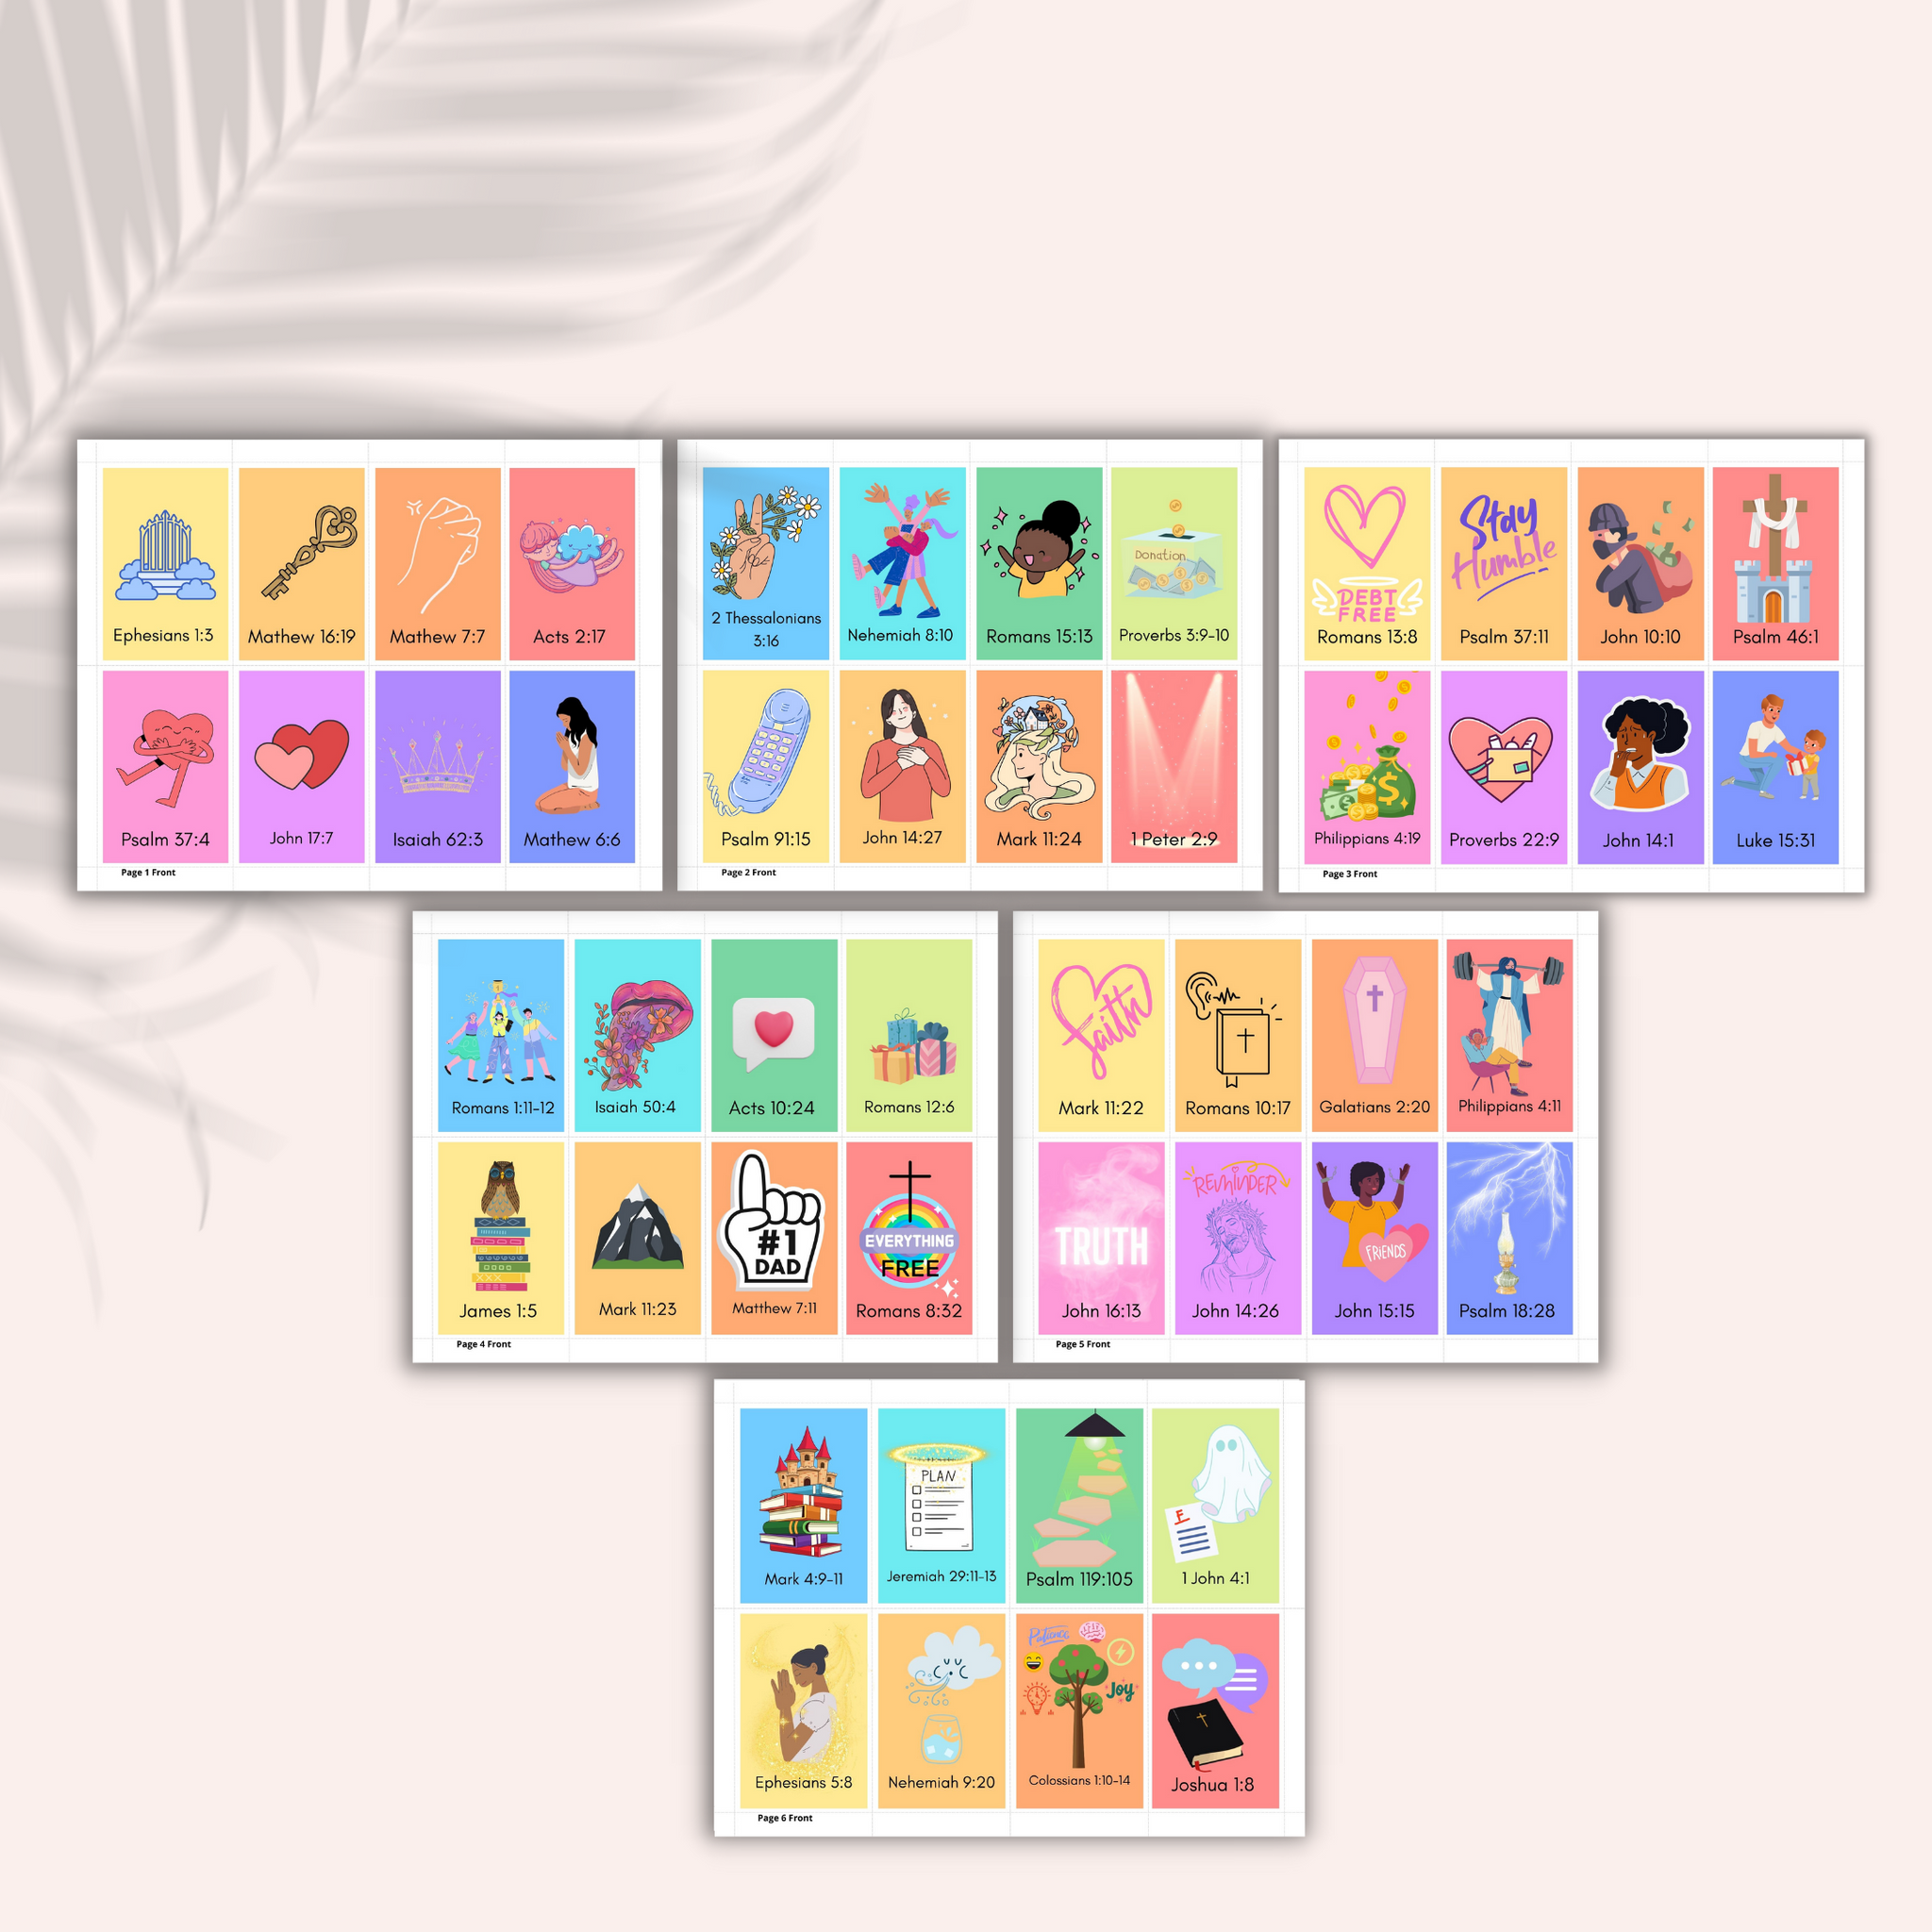 48 Bible Verse Flash Cards with Colorful Illustrations